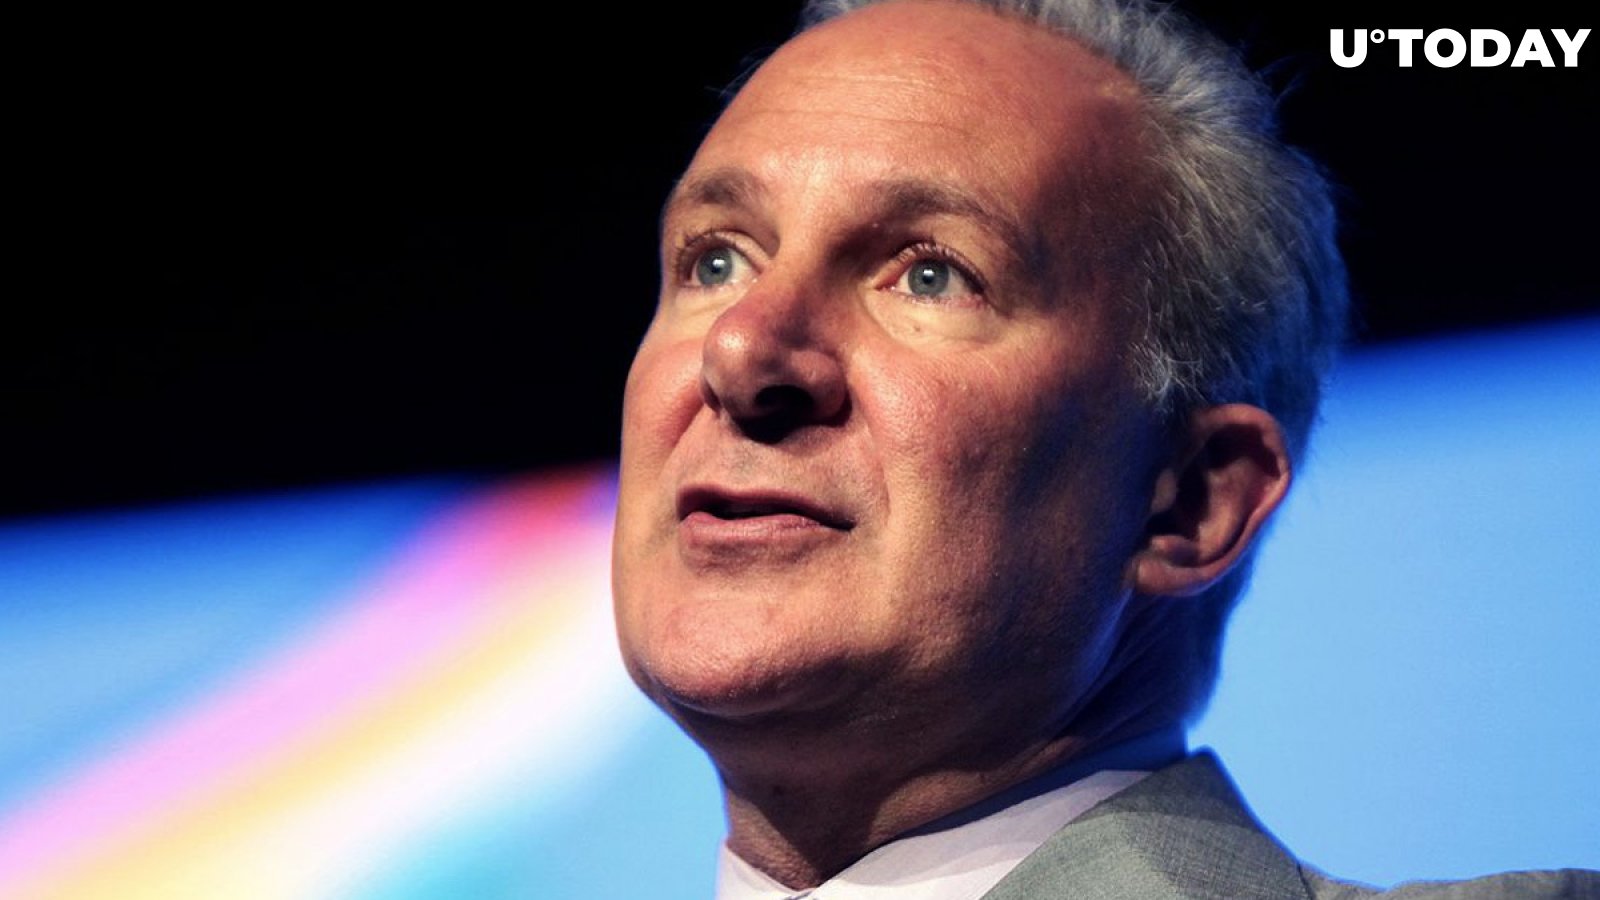 Bitcoin’s (BTC) Downside Risk Limited to 100 Percent Unlike Oil: Peter Schiff